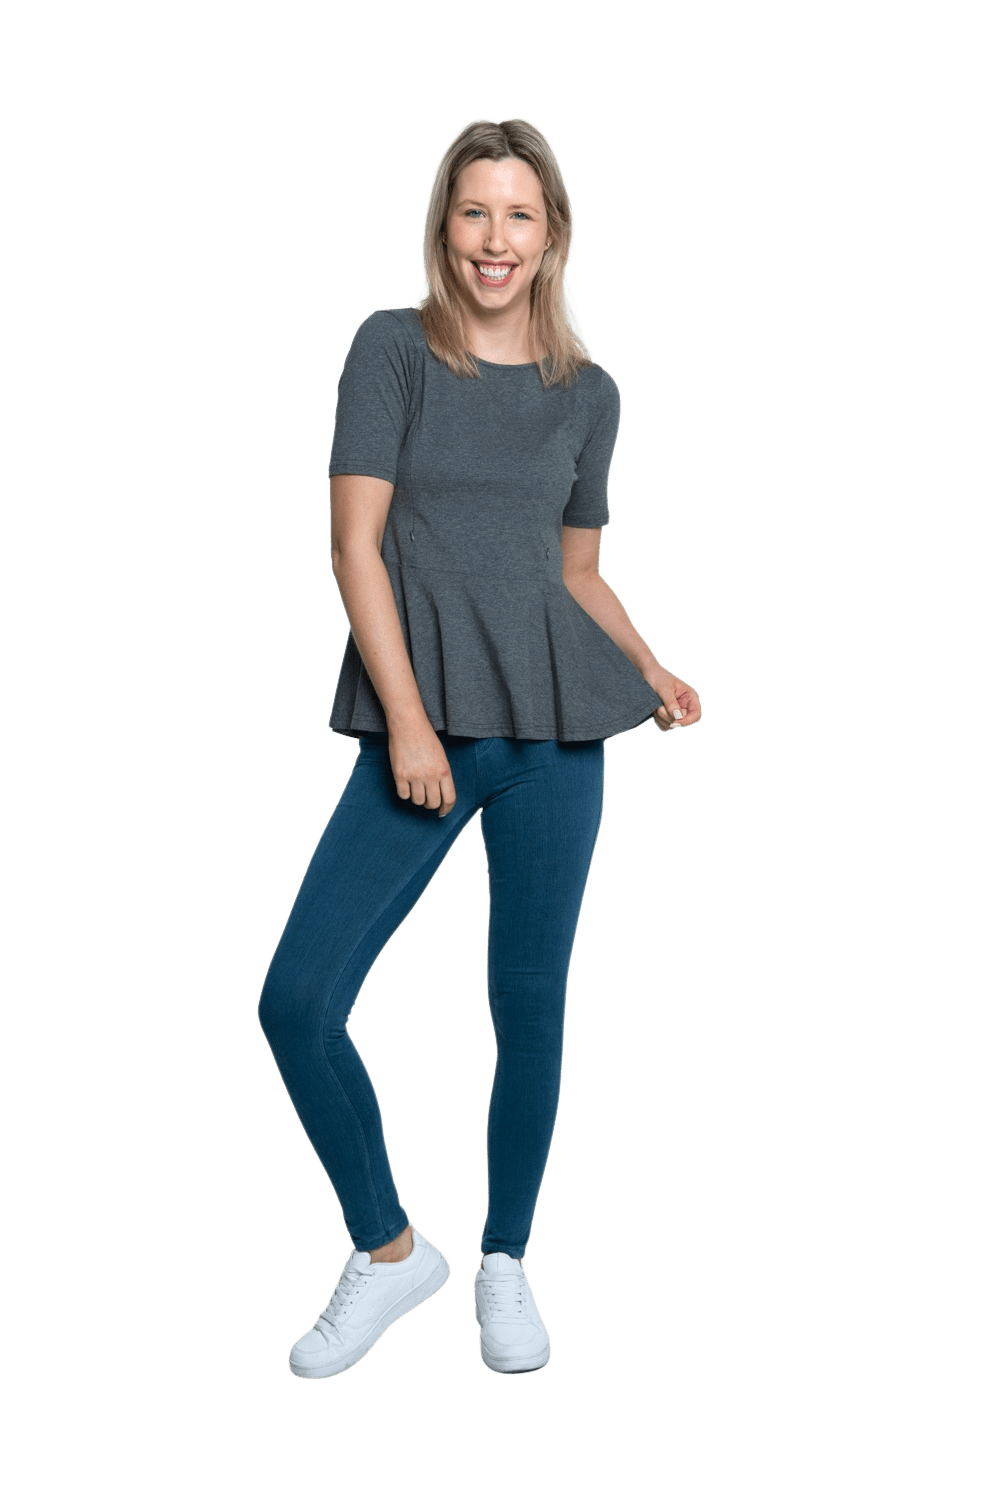 Petite model facing camera wearing charcoal grey short sleeved top. Featuring rounded neckline and peplum tier under bust. Isla available in sizes 6-26